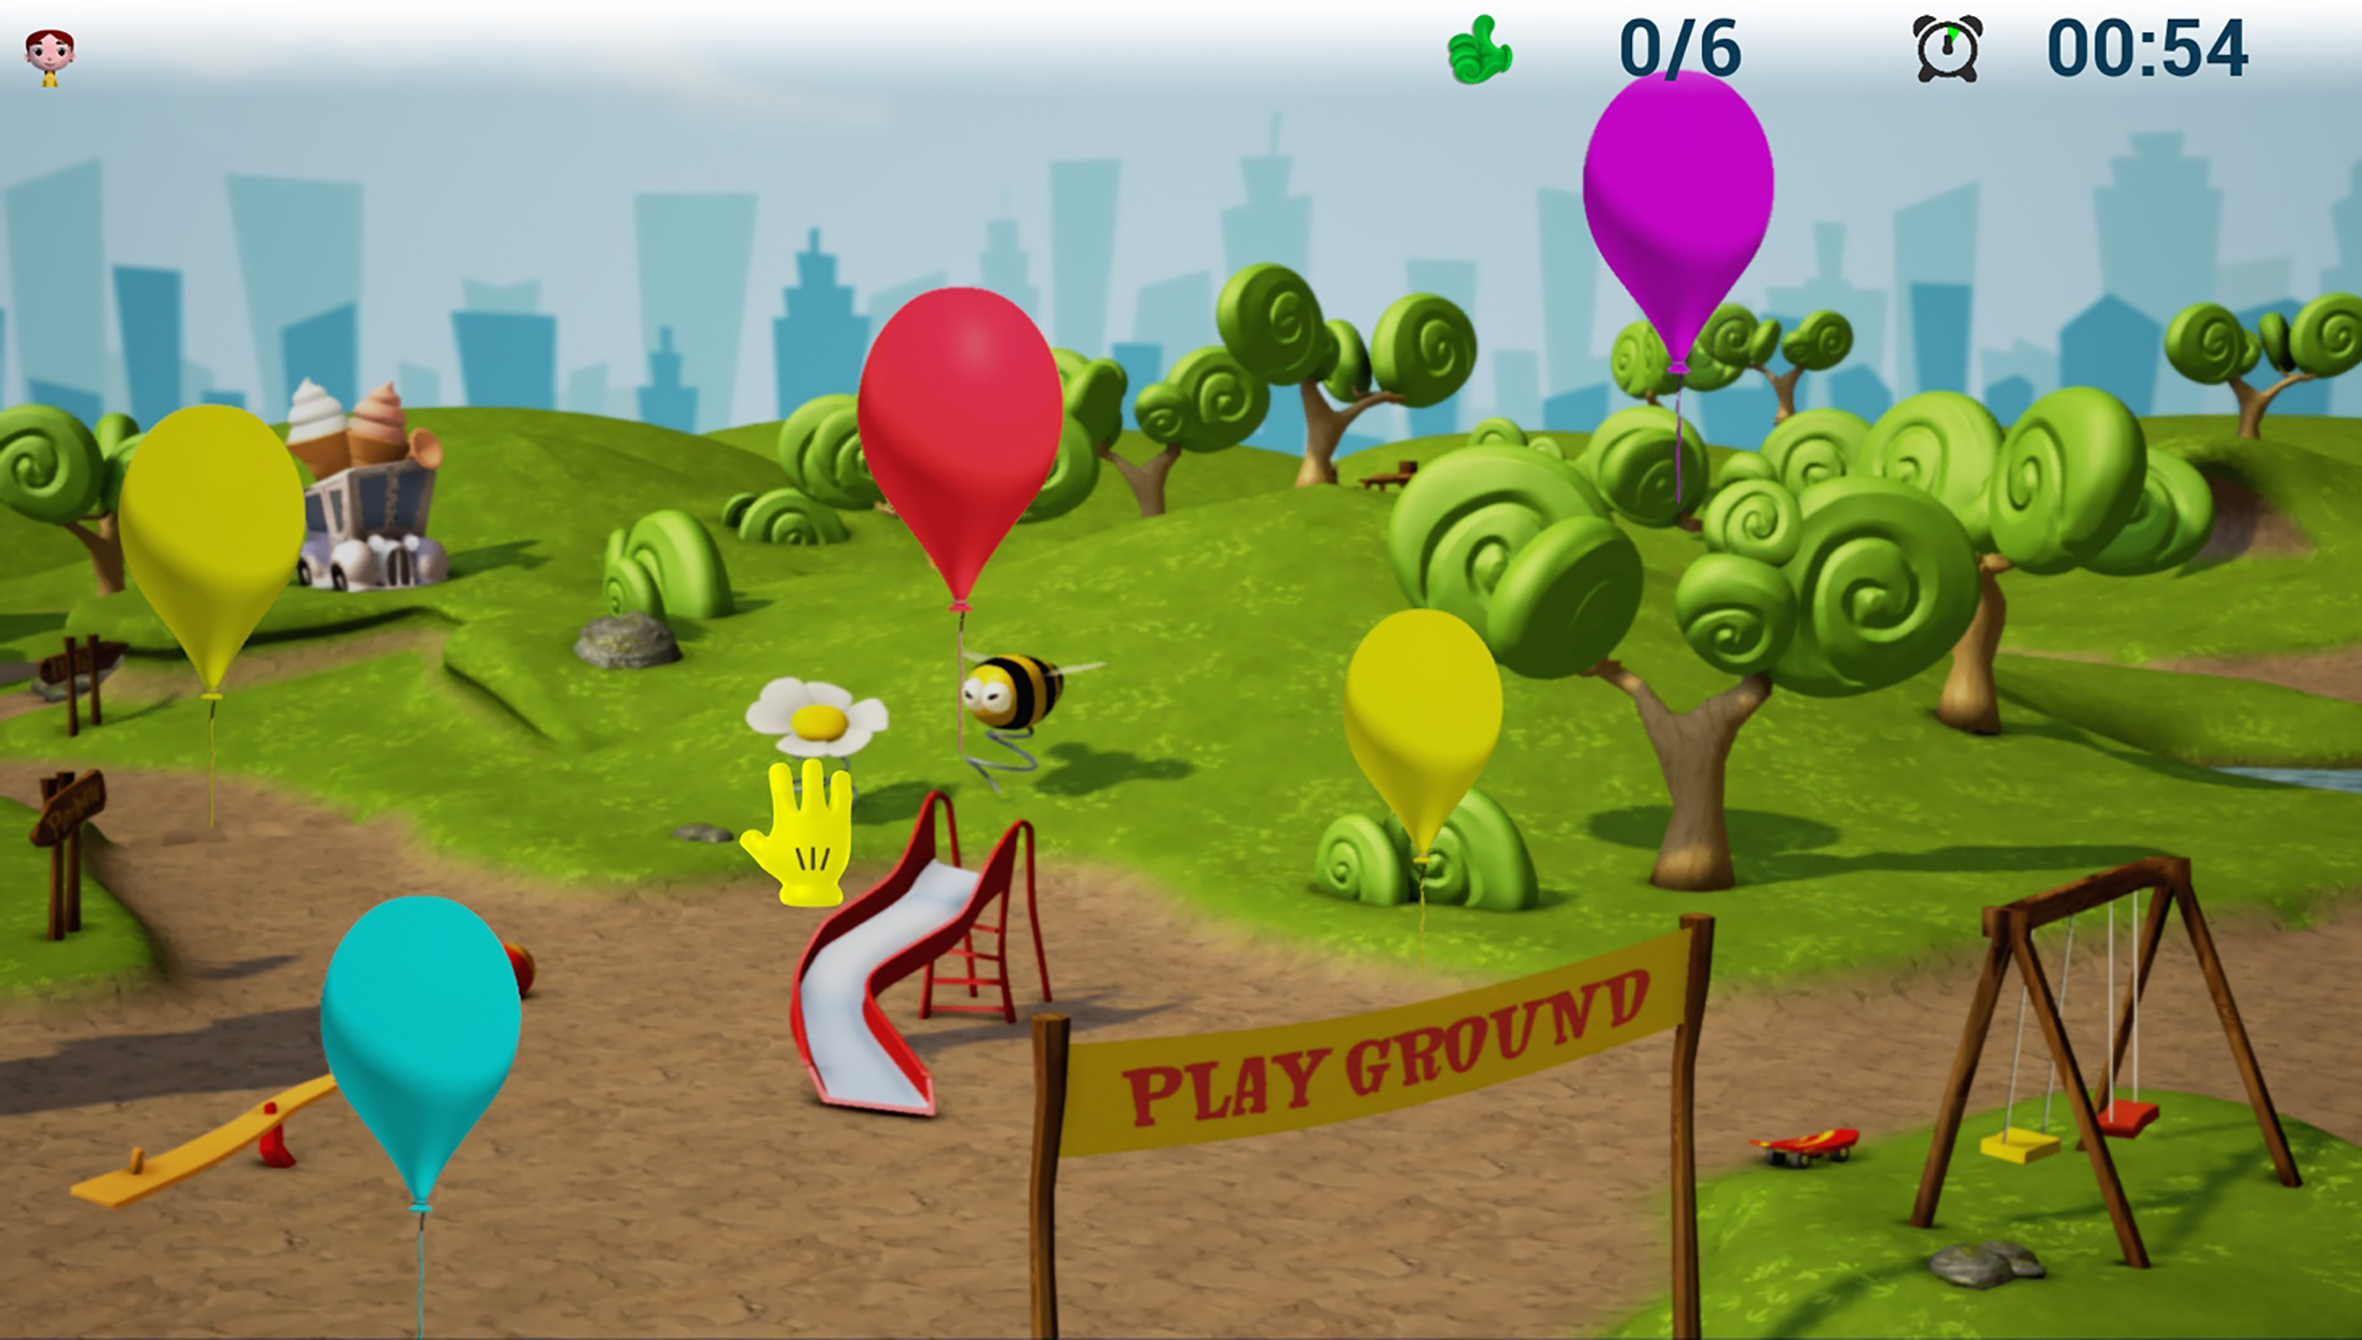 An example of game activity: the “blow the balloons game”.